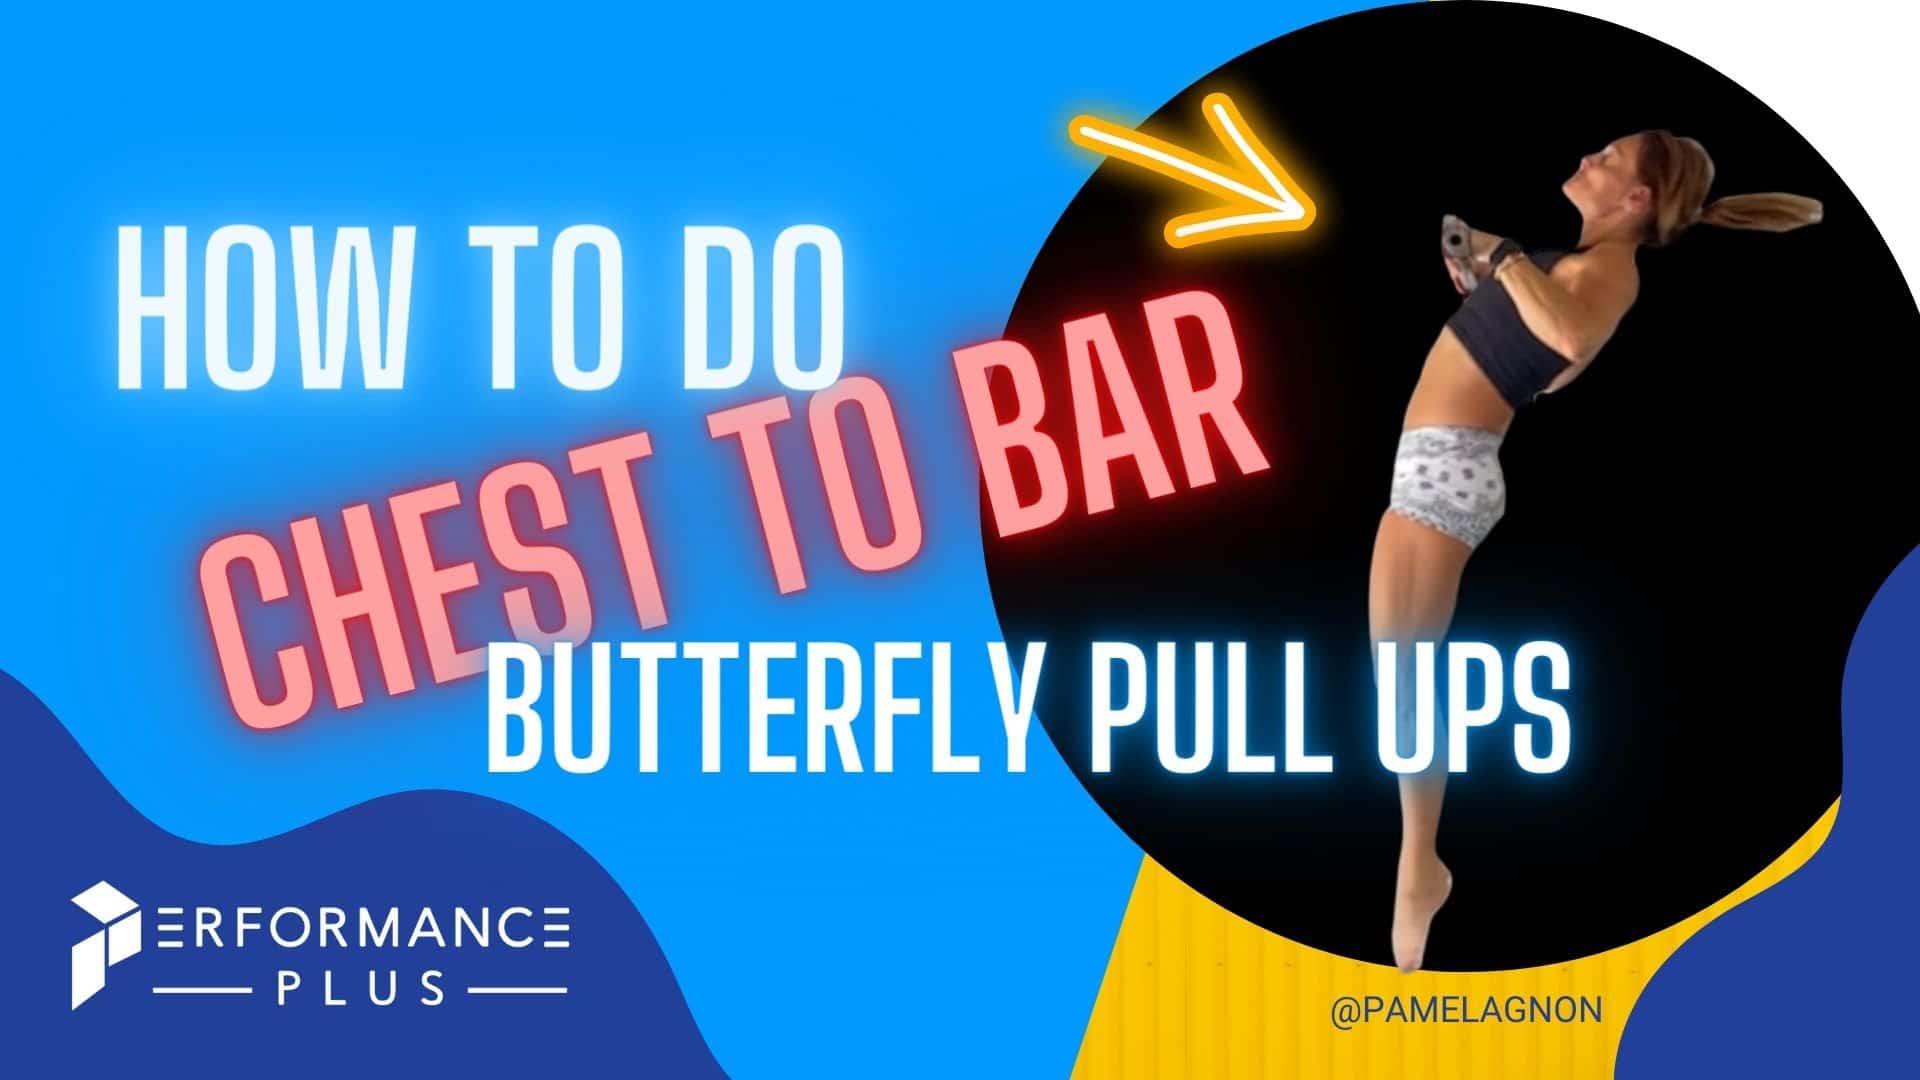 Chest to Bar Butterfly Pull-ups